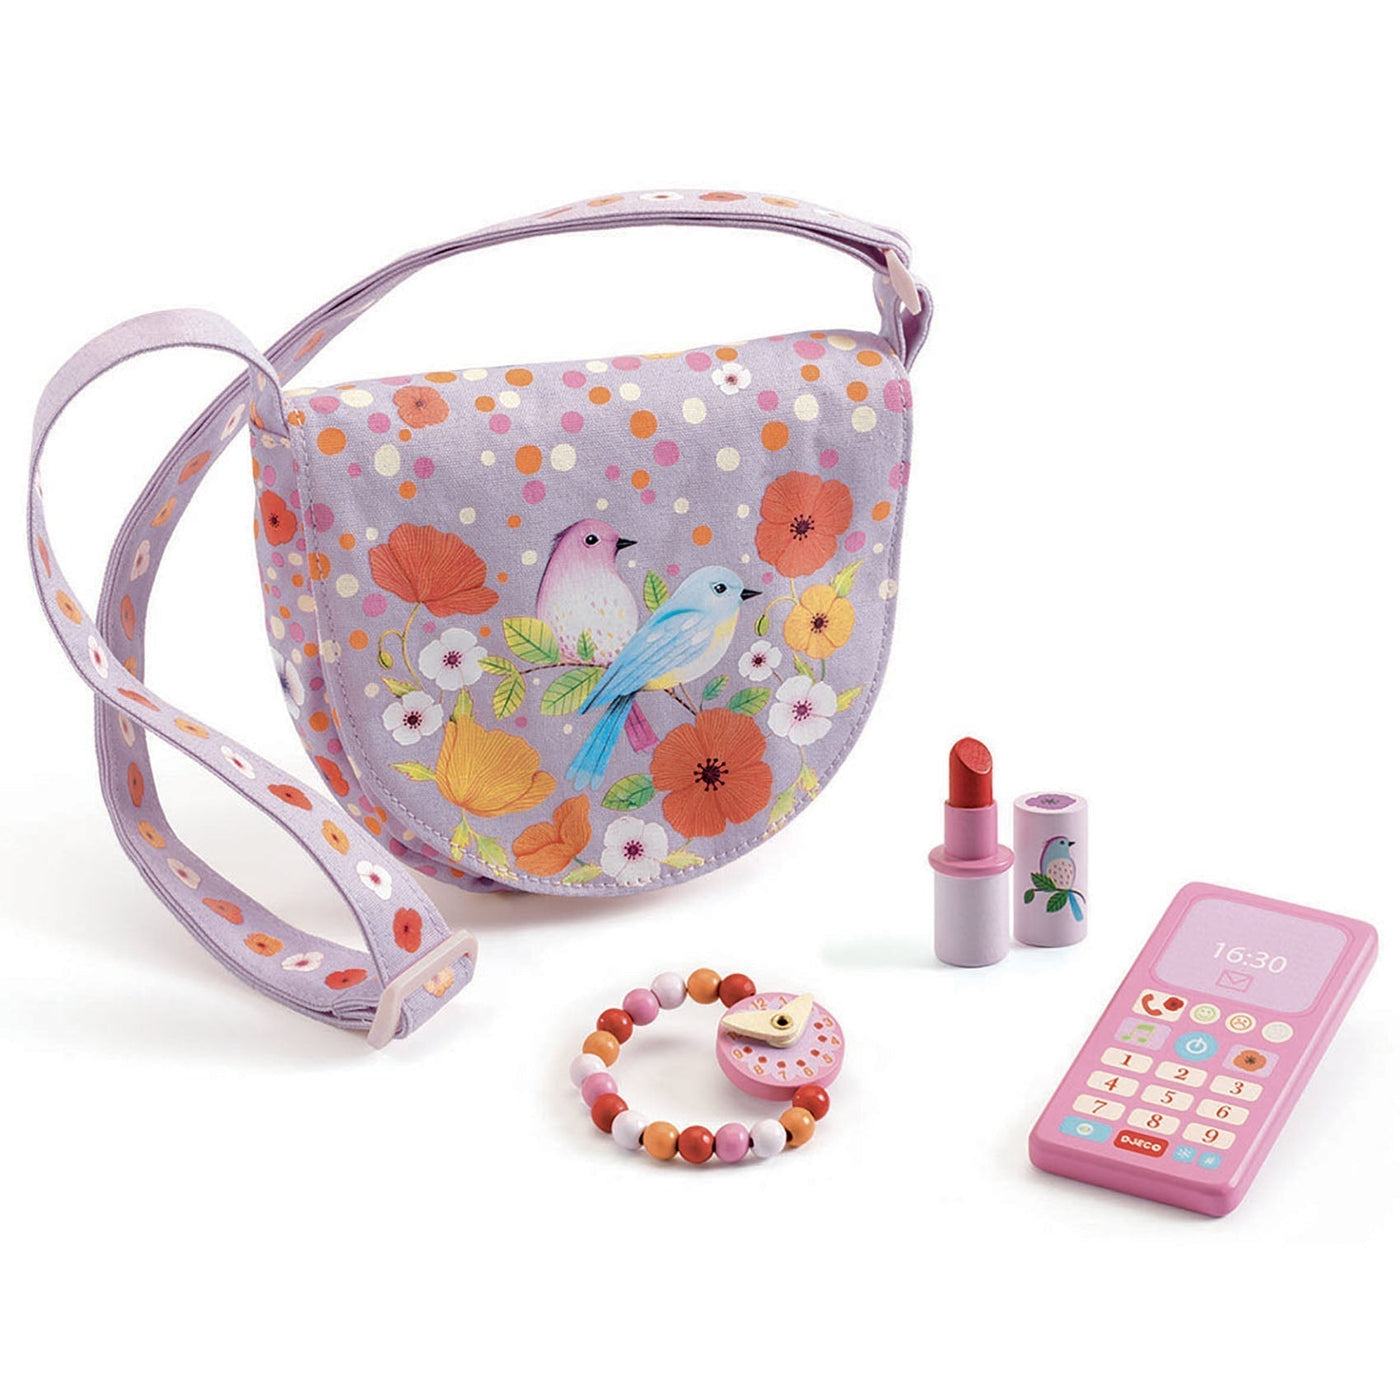 Birdie Bag And Accessories - Role Play - Charms